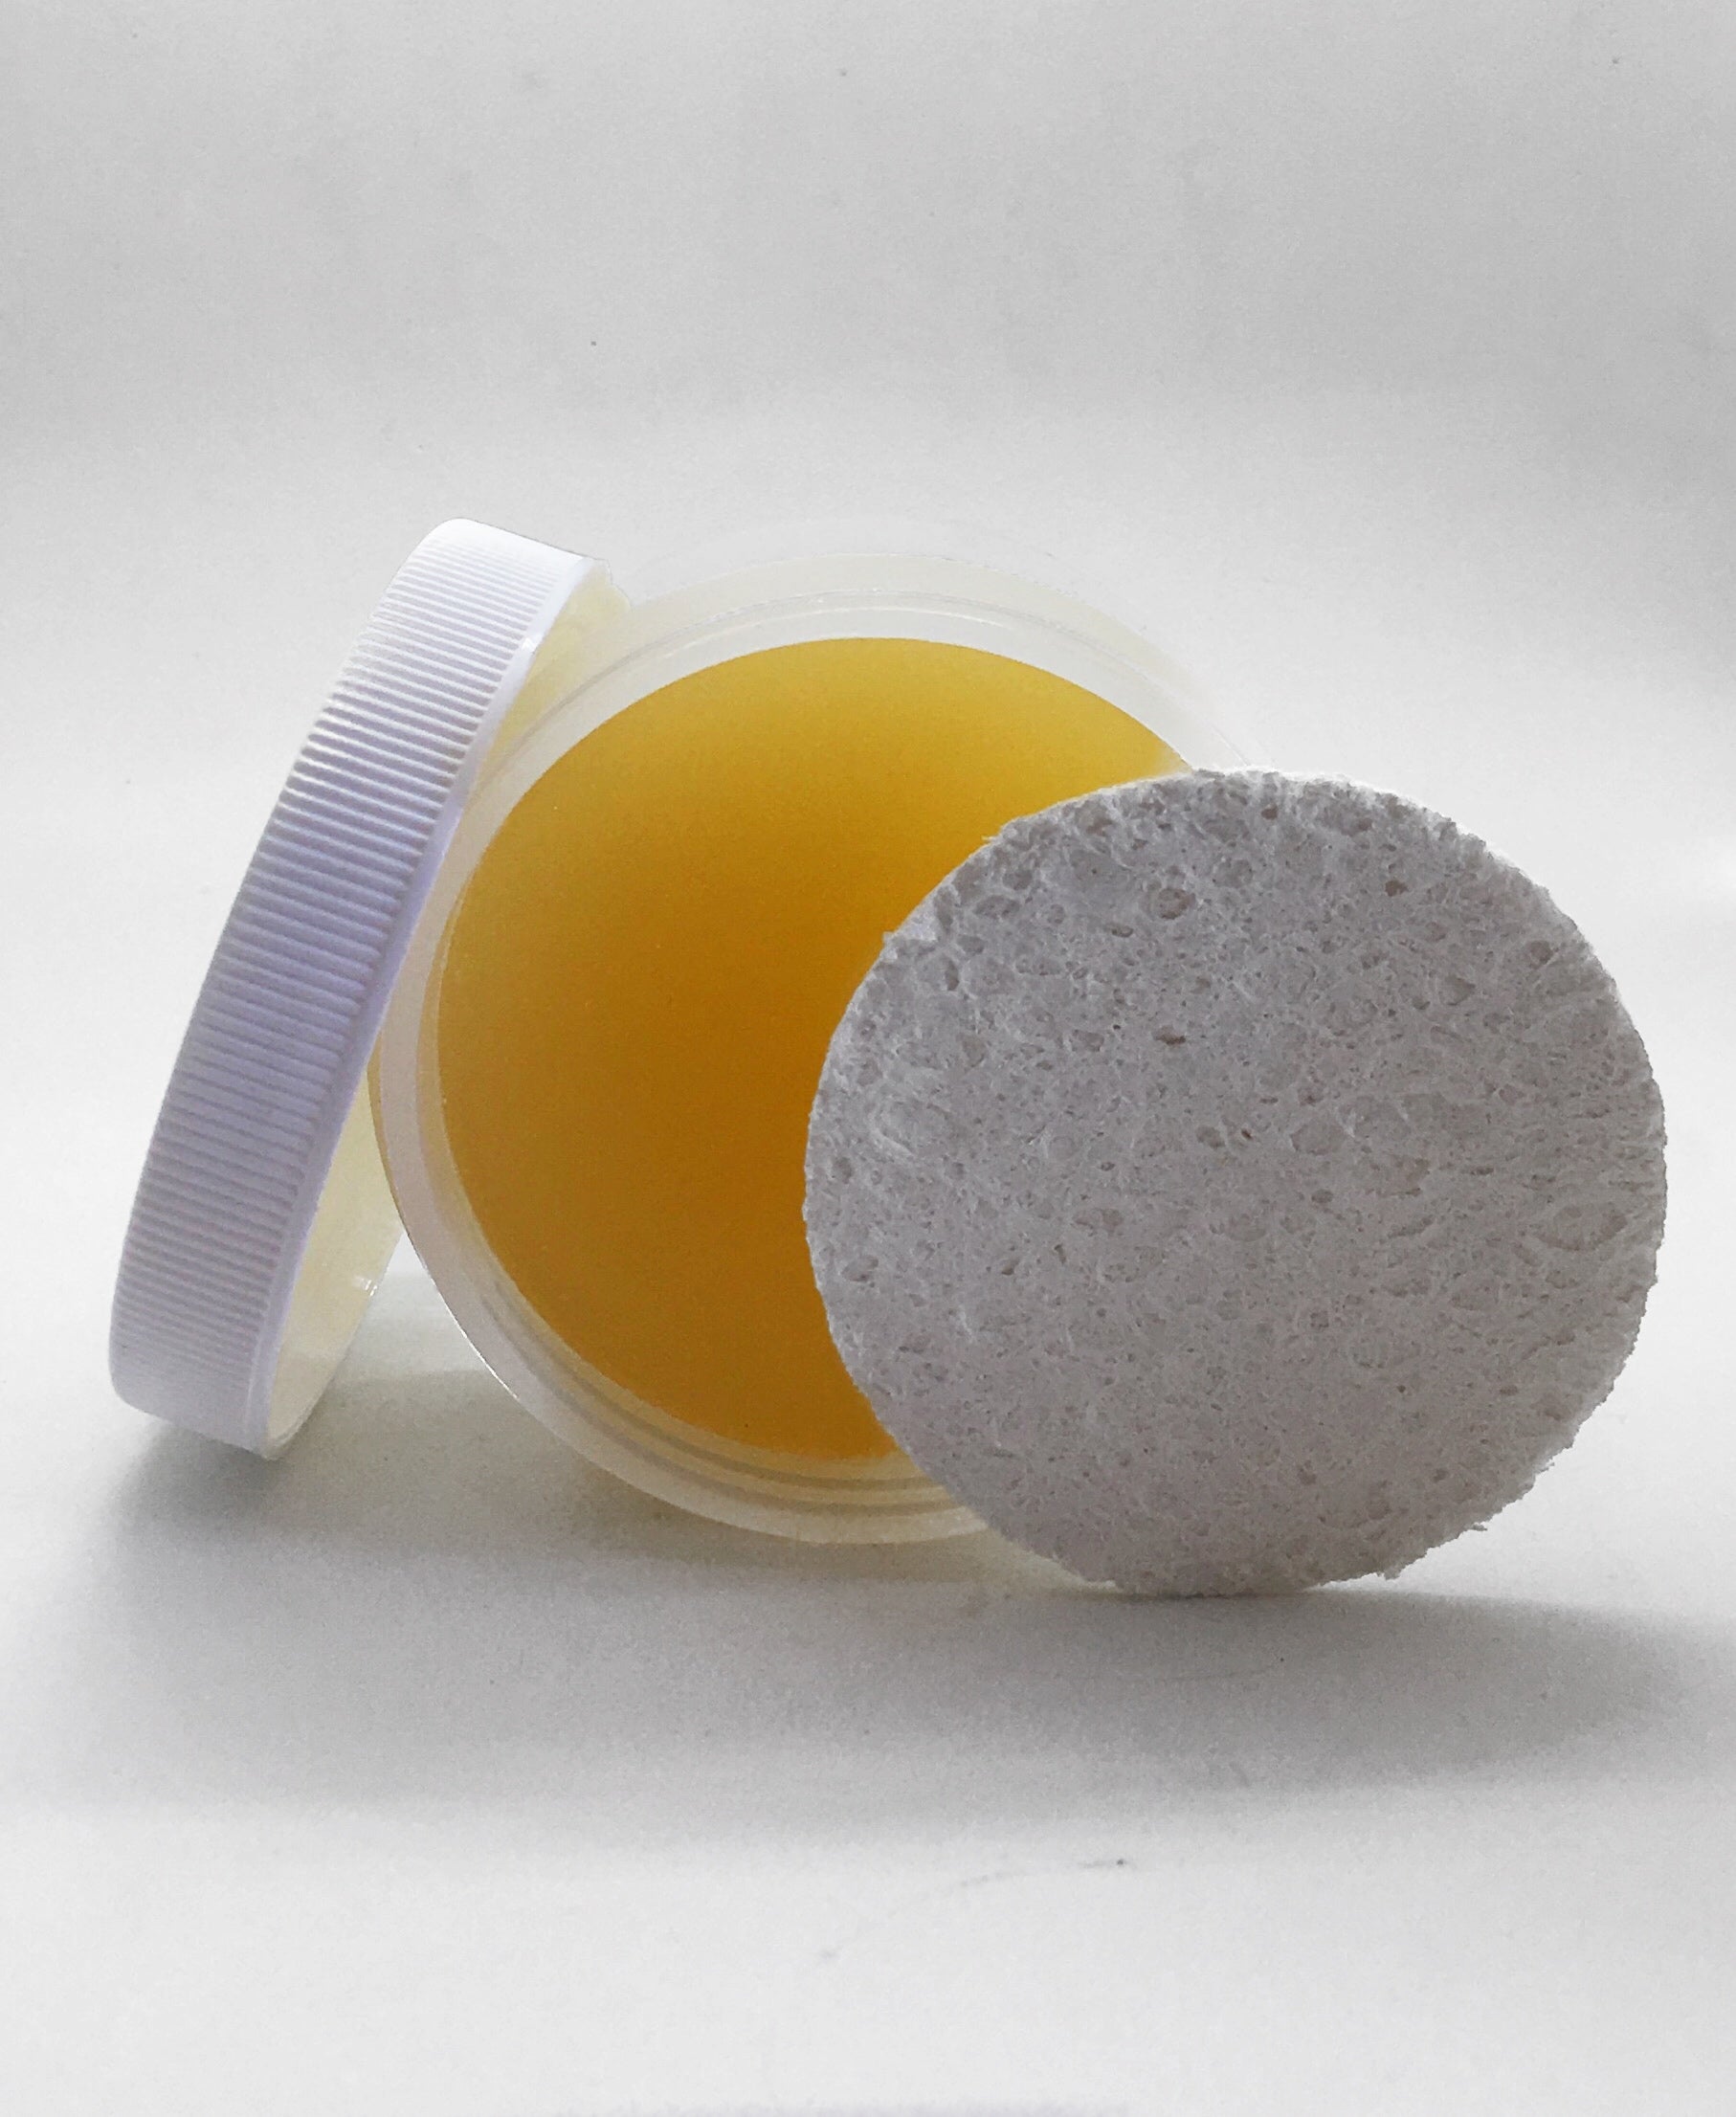 Glow Anti-Blemish Cleansing Bar with Turmeric and Aloe!